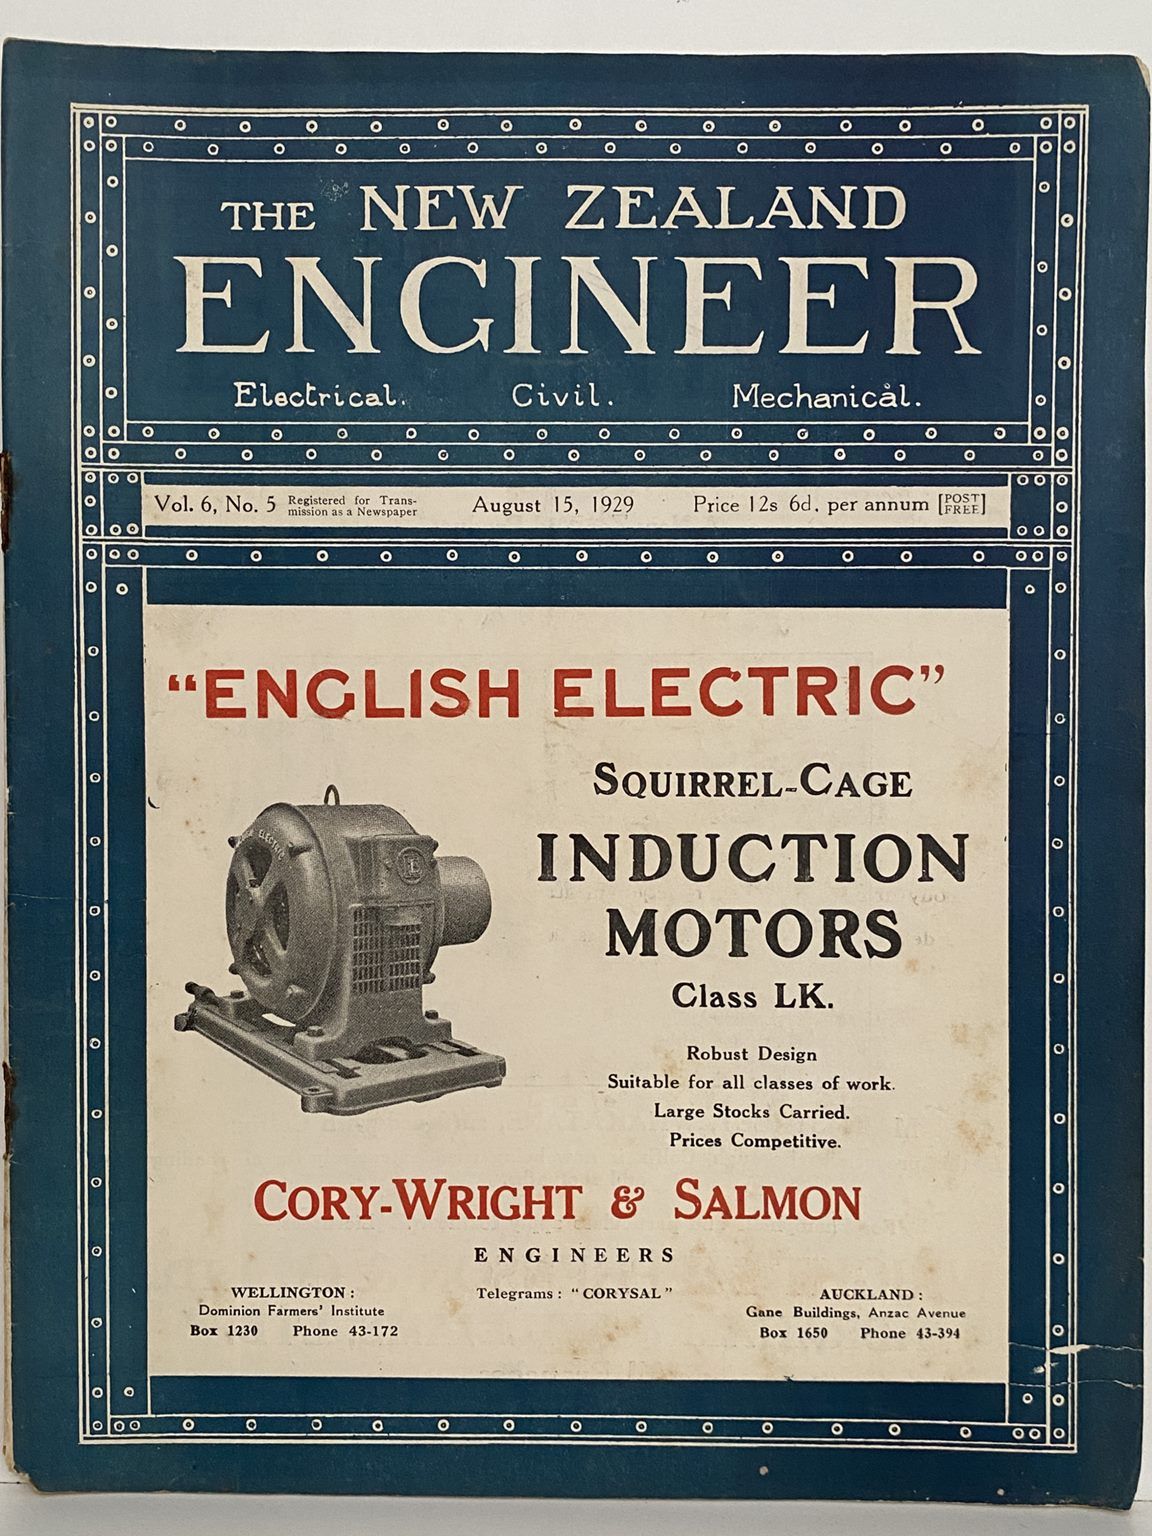 OLD MAGAZINE: The New Zealand Engineer Vol. 6, No. 5 - 15 August 1929